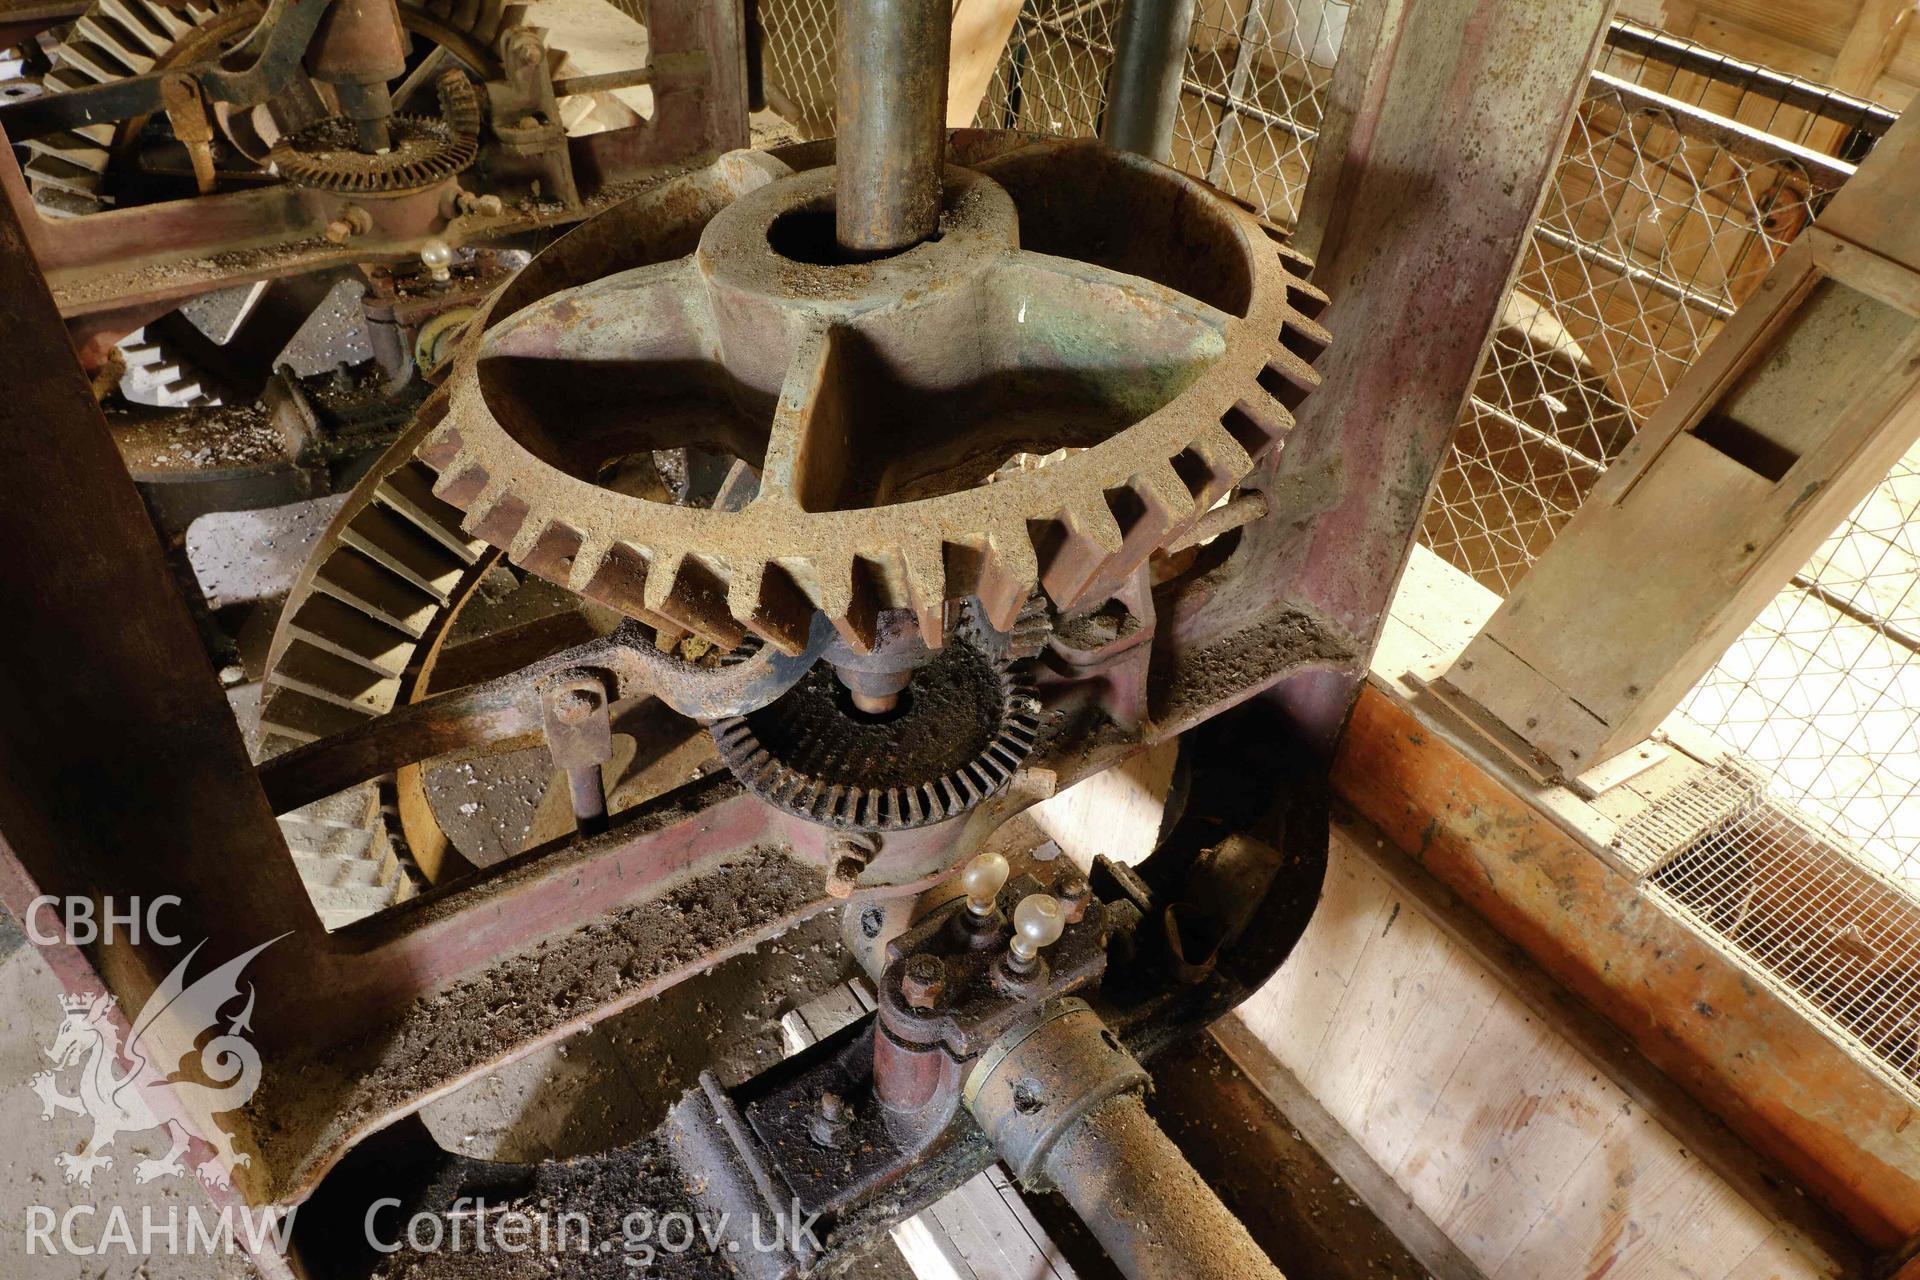 Colour photograph showing Blackpool Mill - bevelled gears driving grindstones. Produced as part of Historic Building Recording for Blackpool Mill, carried out by Richard Hayman, June 2021.